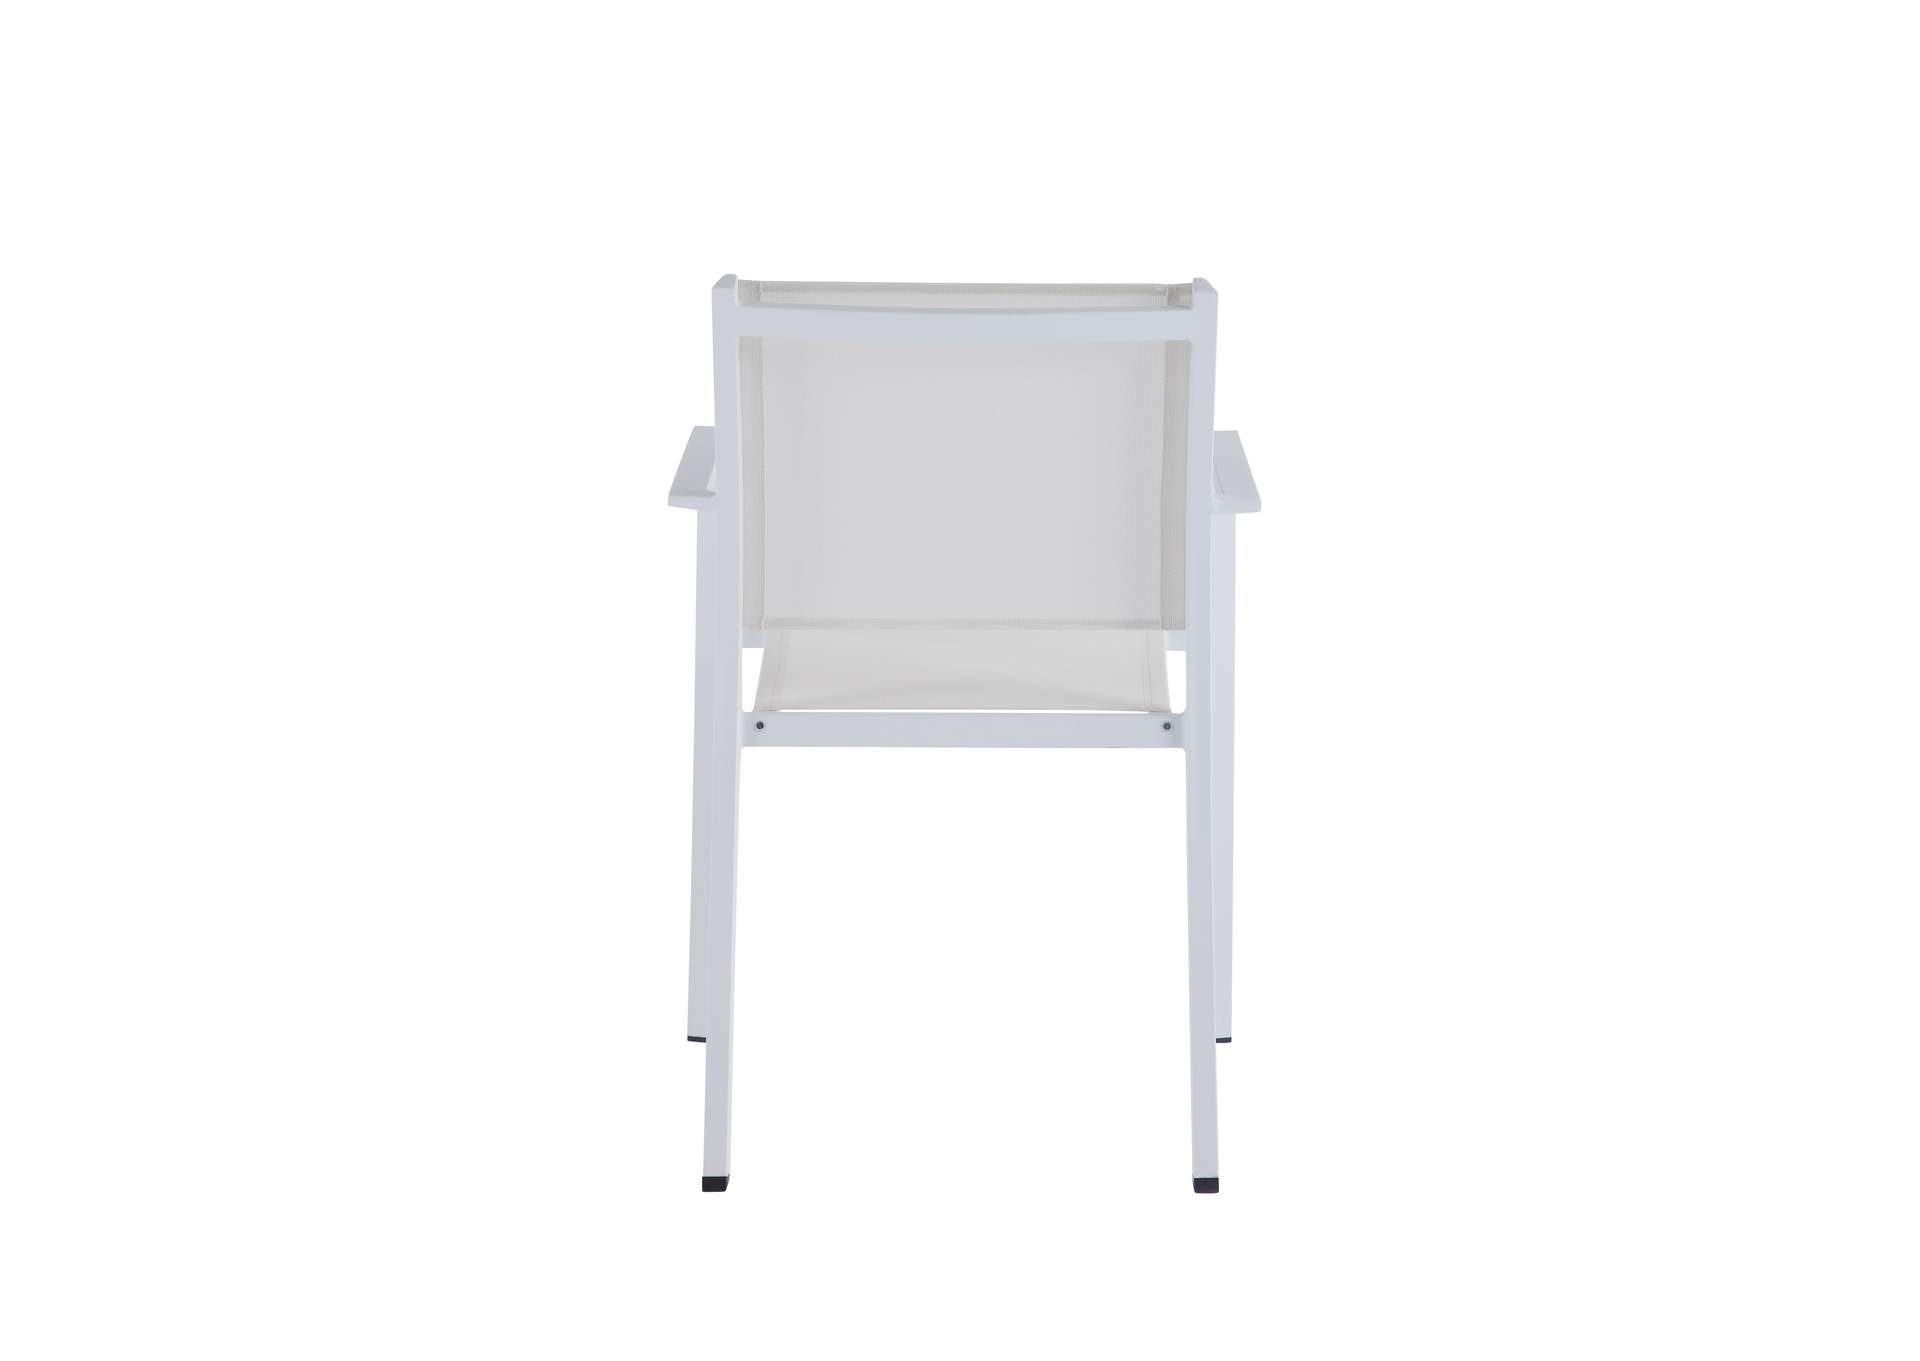 Contemporary Low Back Outdoor Chair with Sling Seat,Chintaly Imports